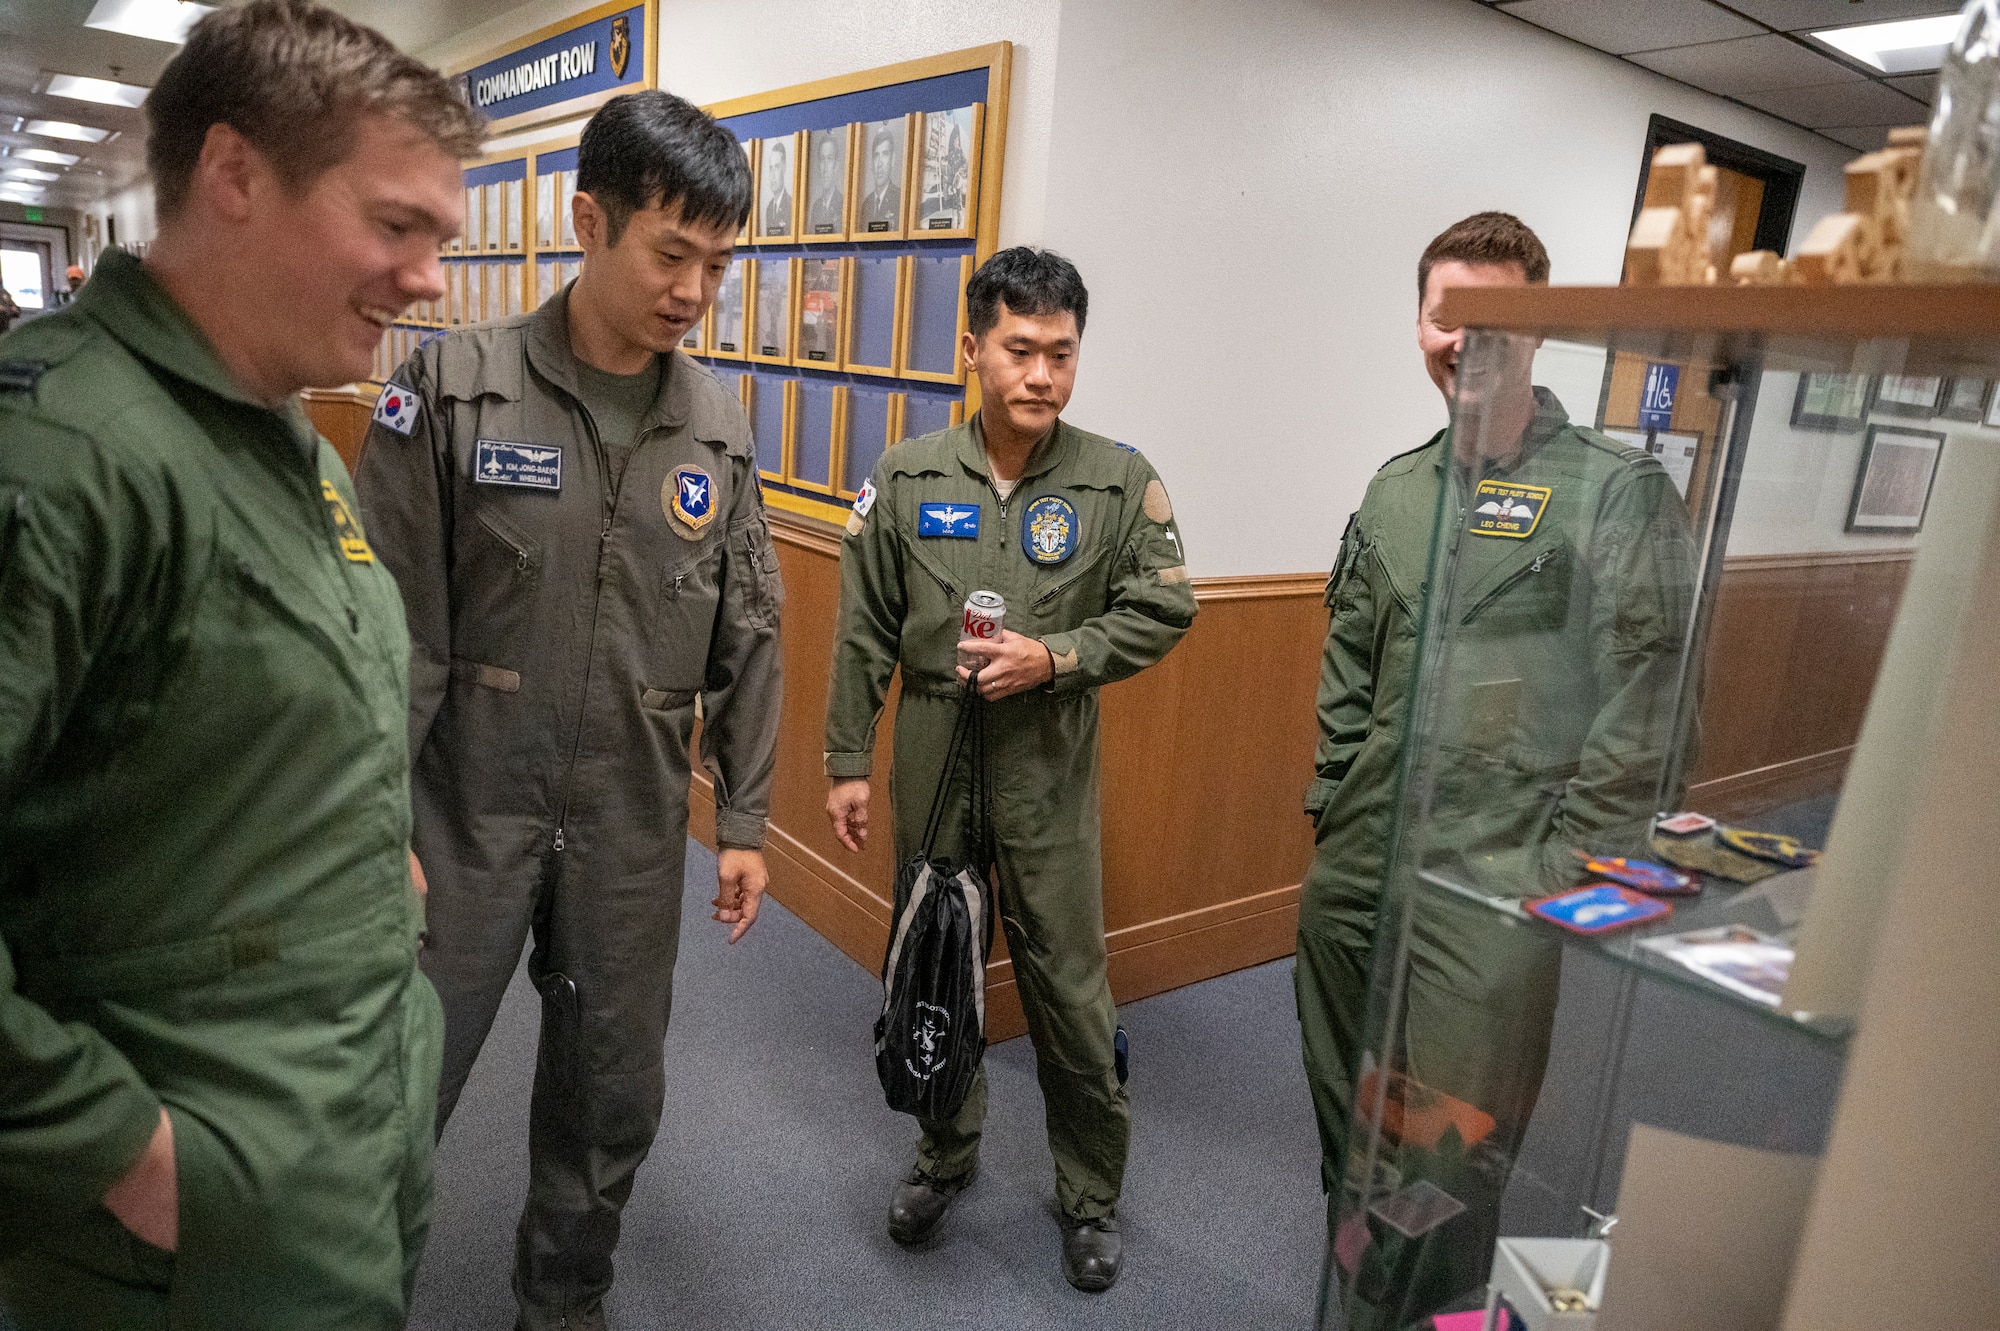 The USAF Test Pilot School (TPS) at Edwards Air Force Base hosted the Republic of Korean Air Force (ROKAF) for a technical exchange, sharing both flight experiences and cultural traditions.